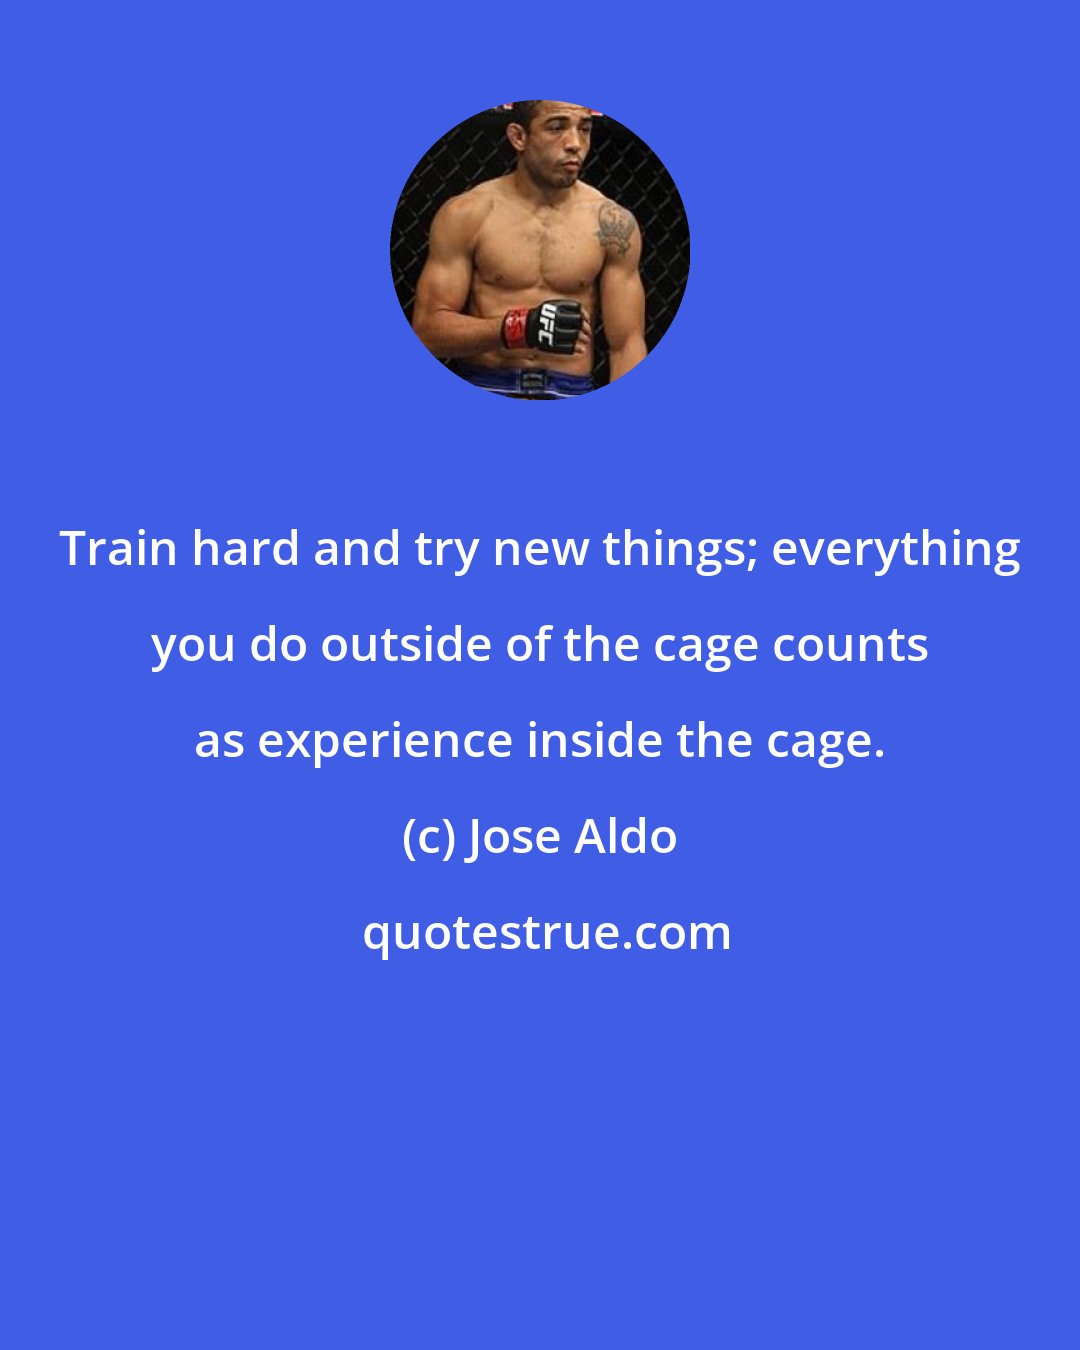 Jose Aldo: Train hard and try new things; everything you do outside of the cage counts as experience inside the cage.